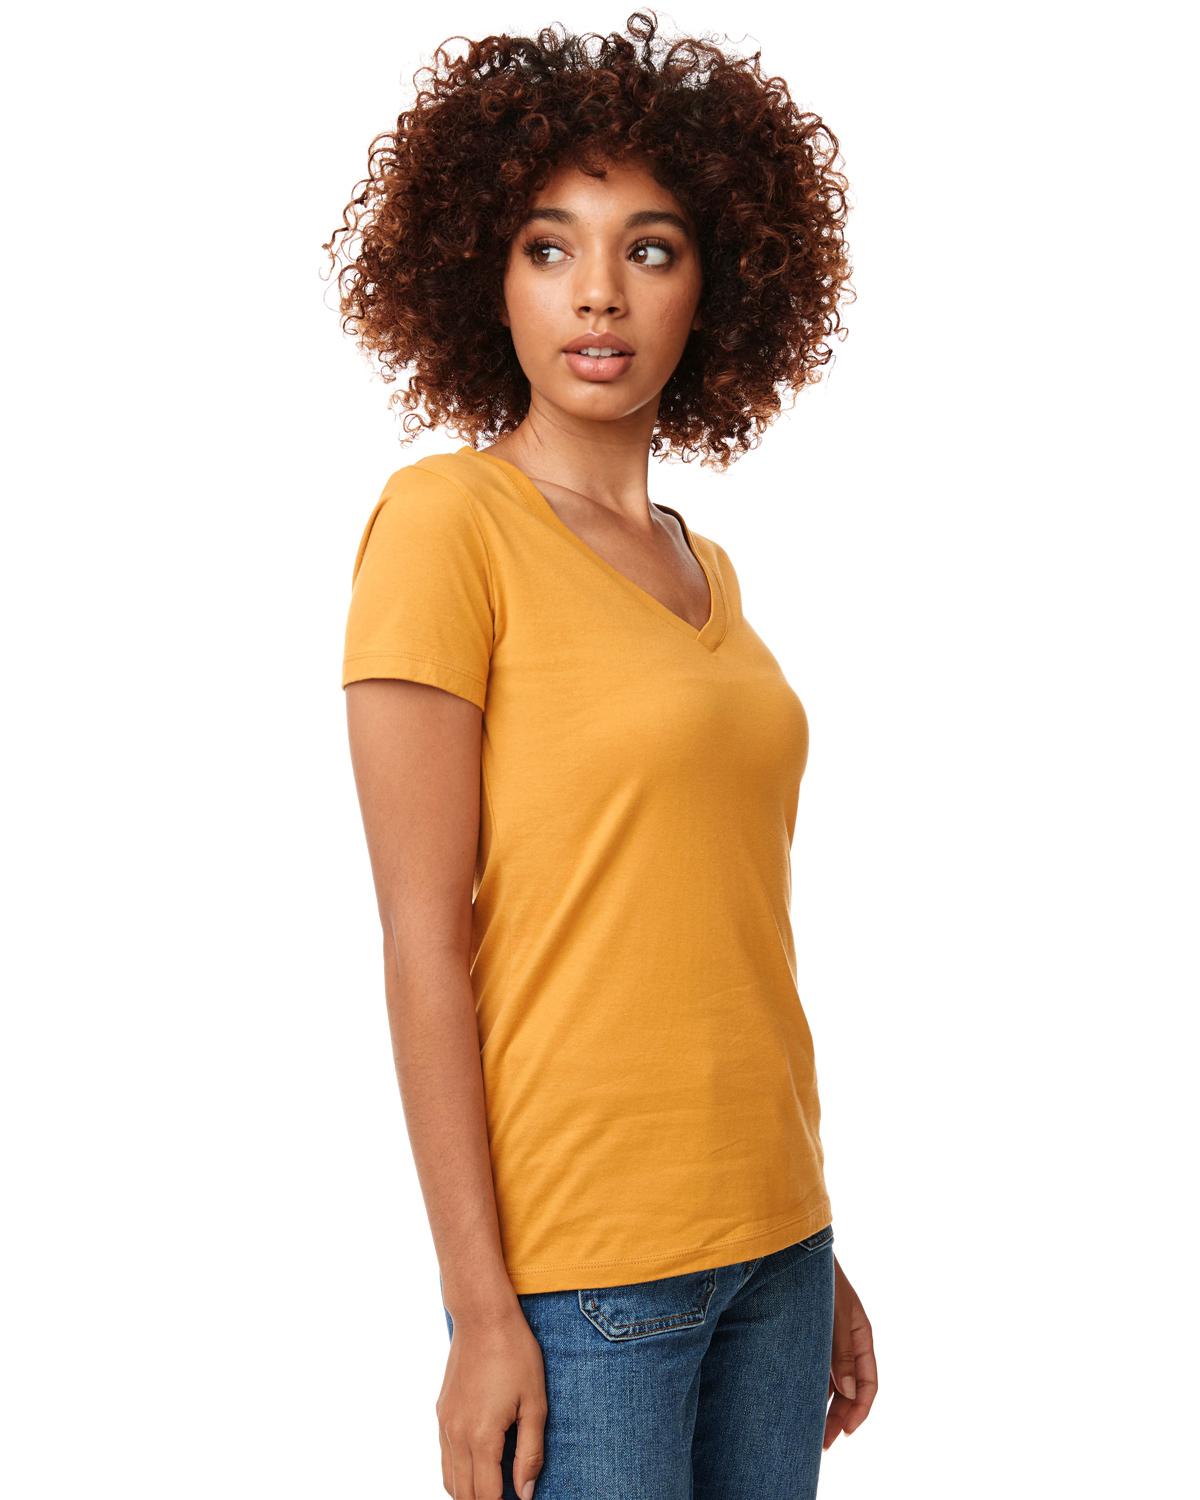 Next Level N1540 Ladies' Ideal V-Neck T-Shirt at Wholesale Prices